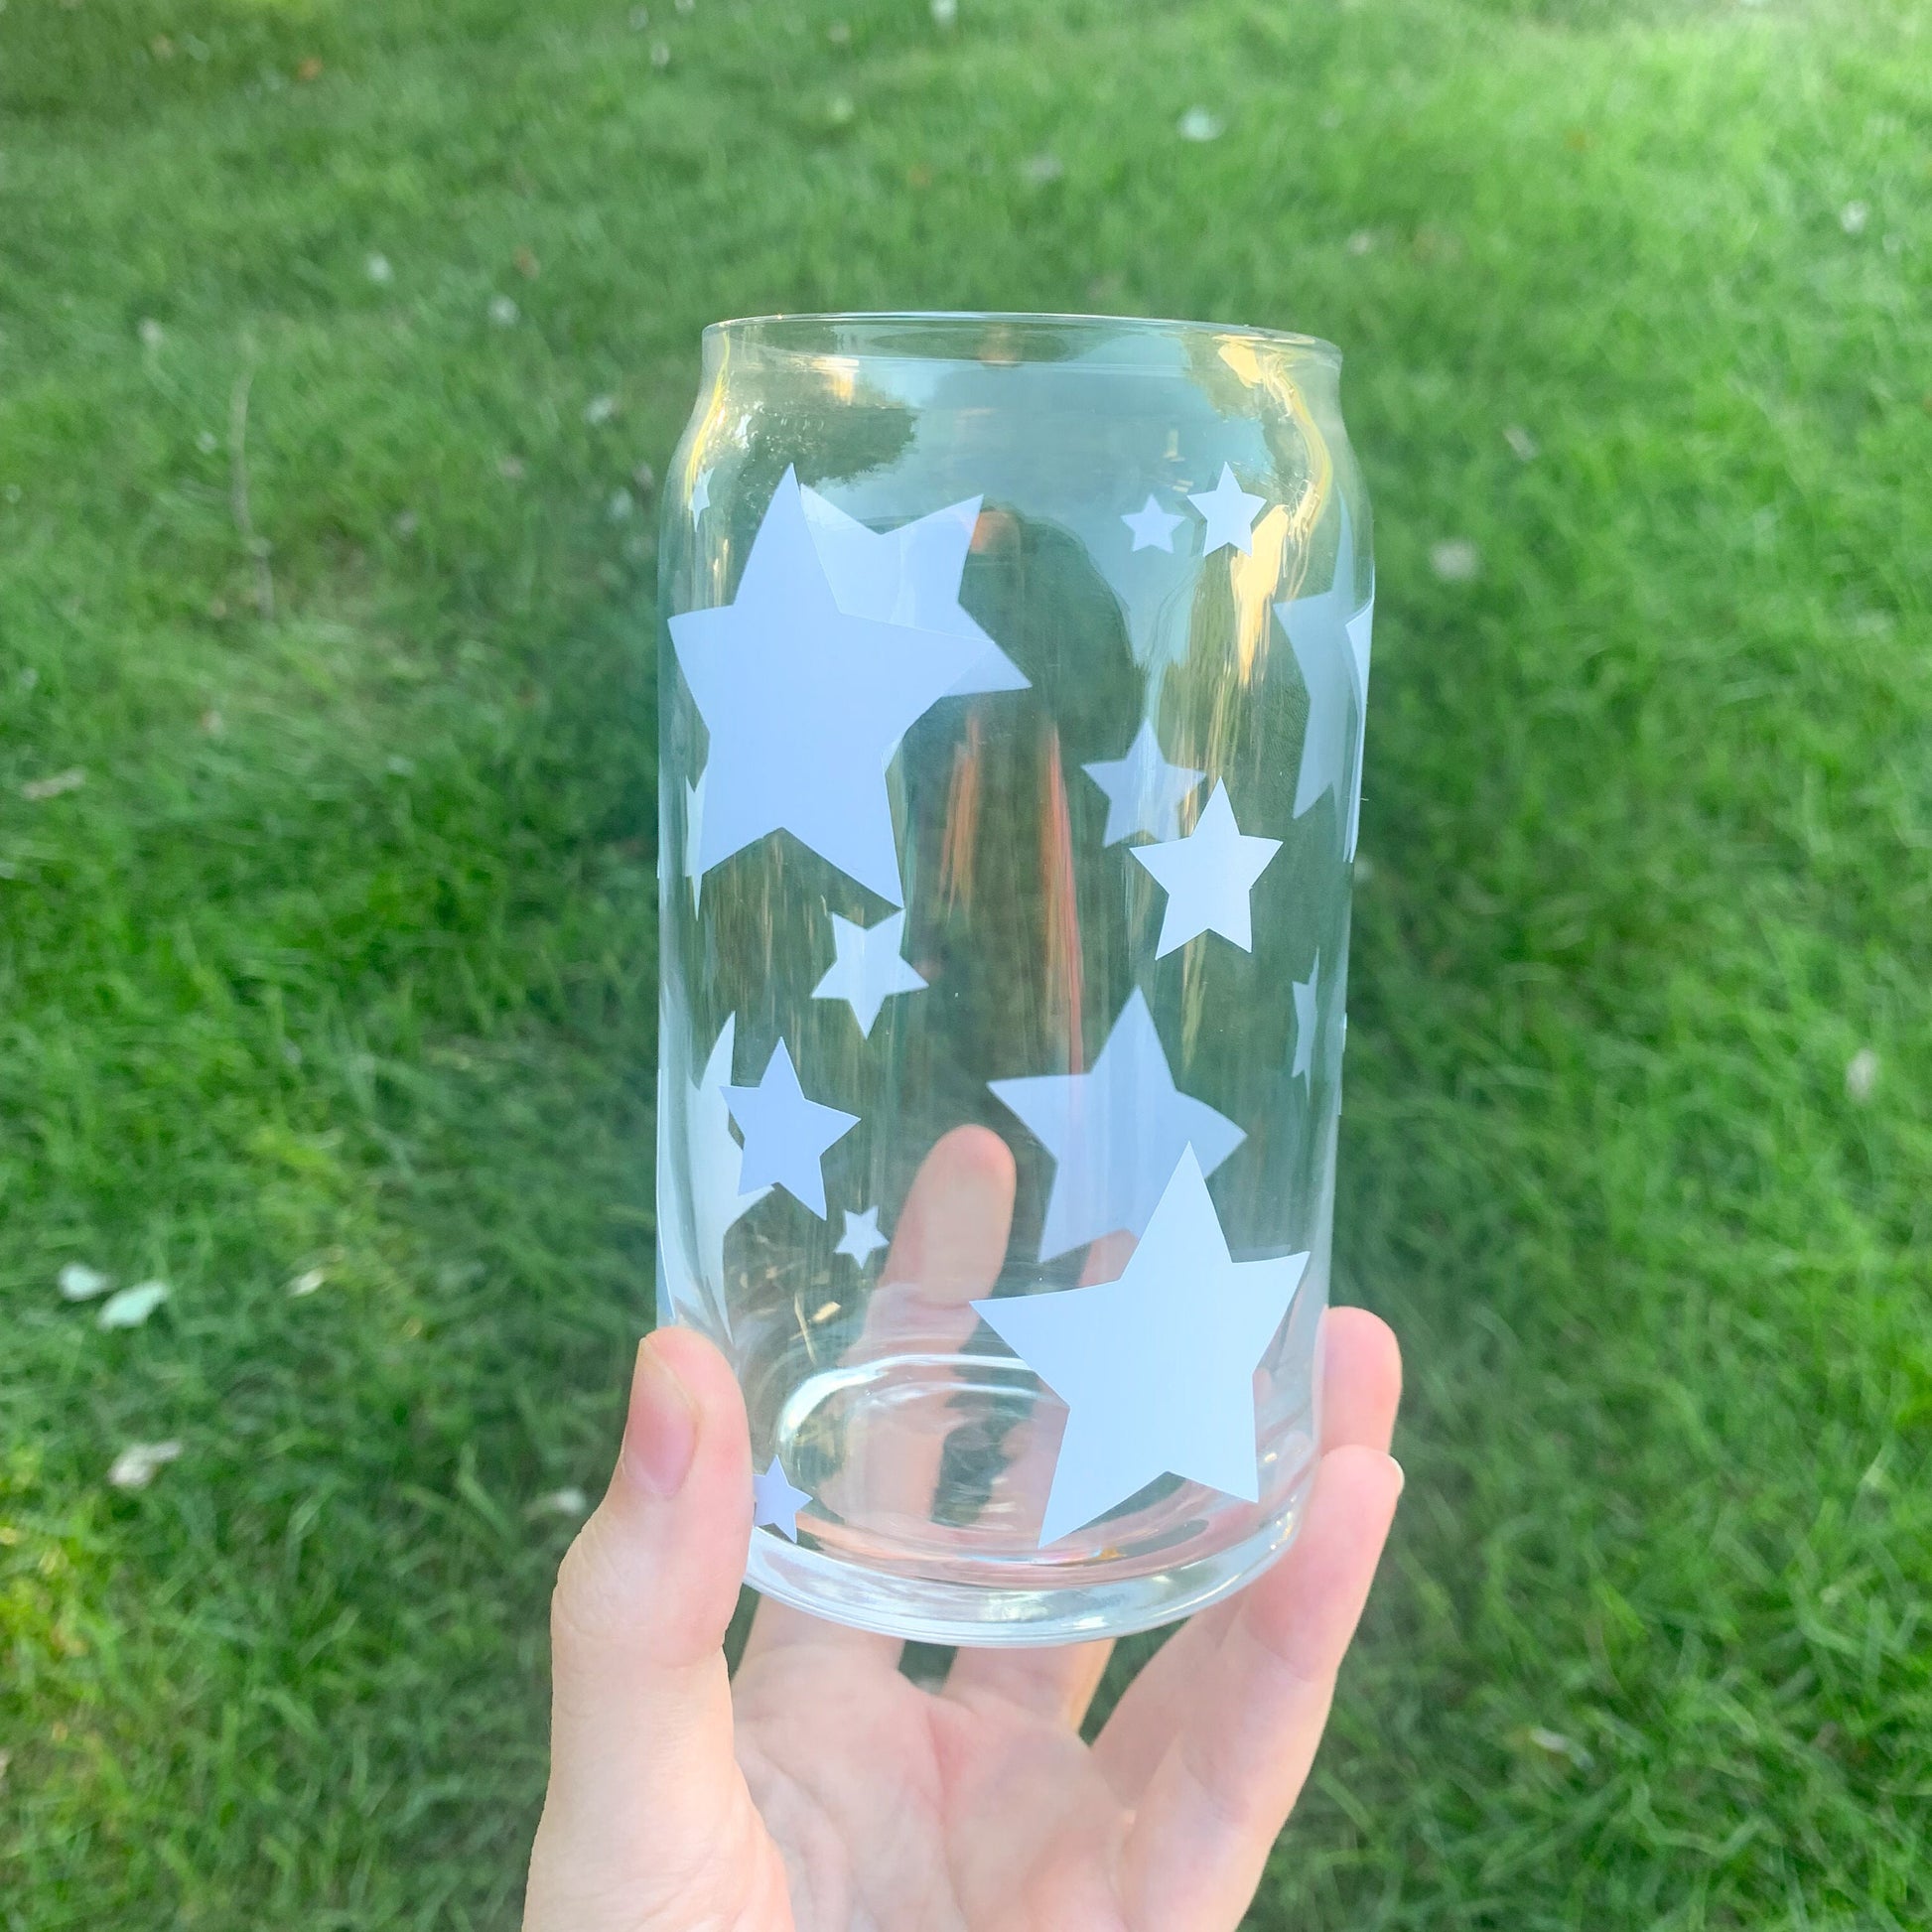 Empty blue star glass cup being held above green grass.